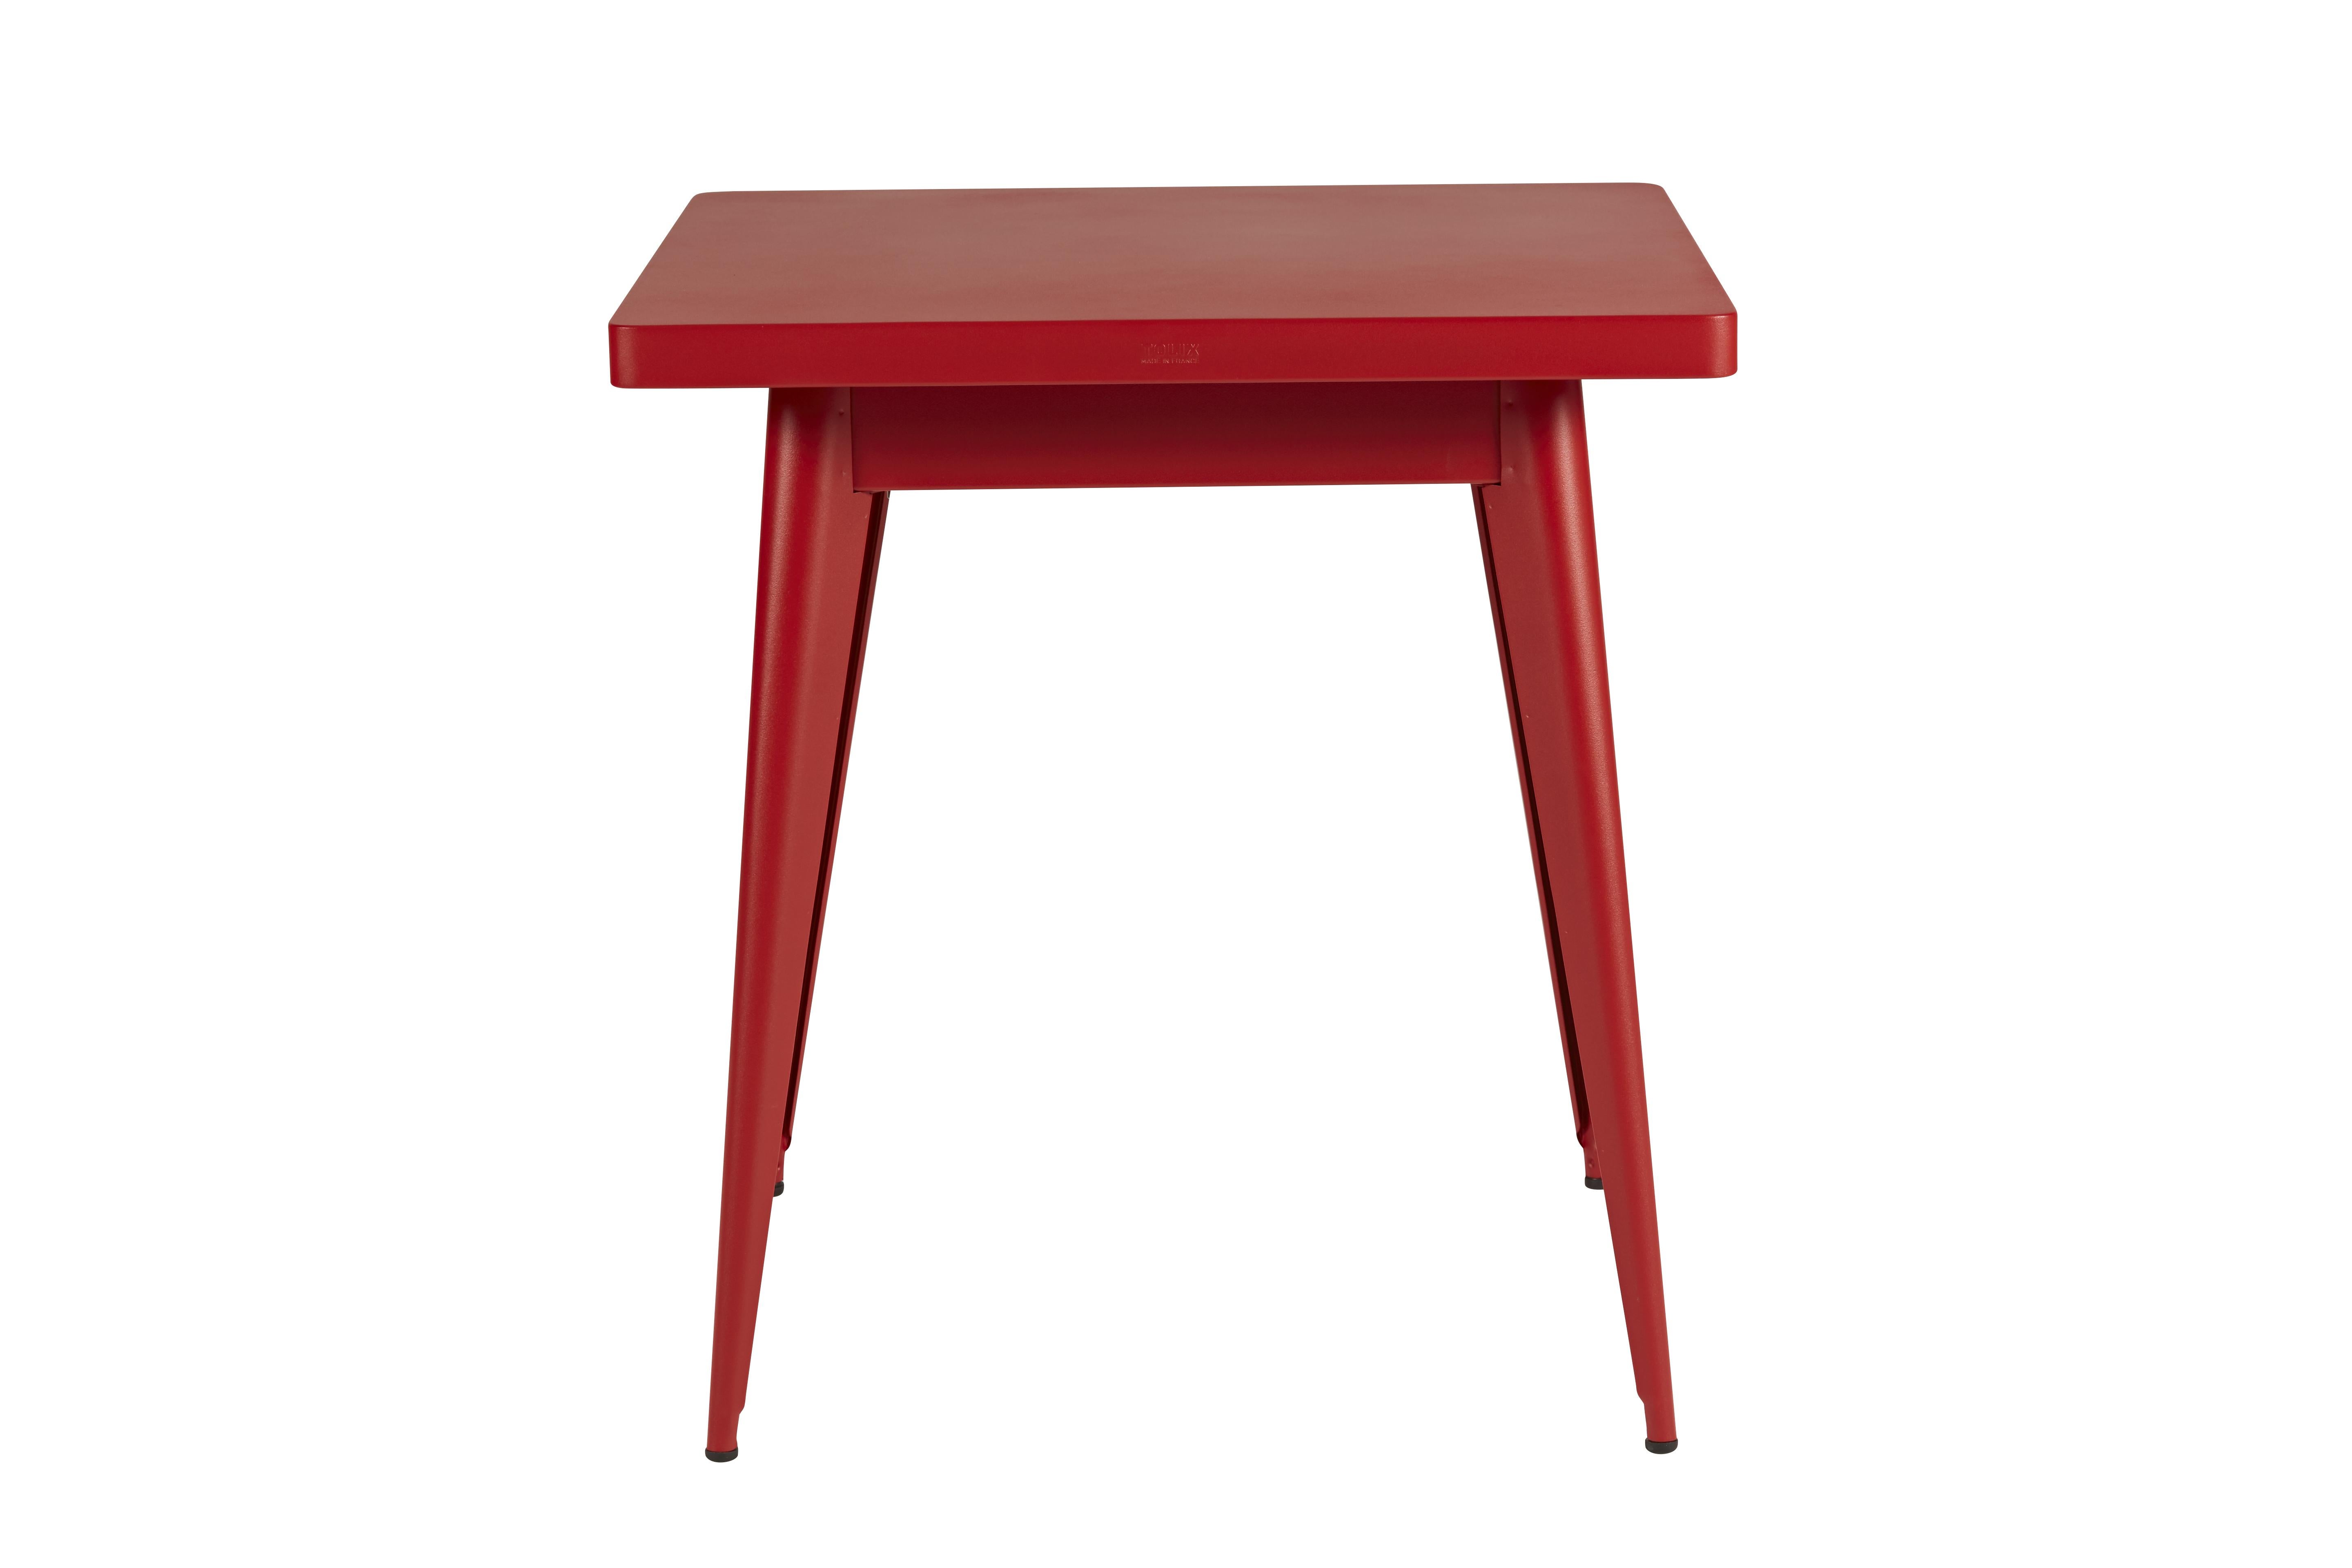 For Sale: Red (Piment) 55 Square Side Table 70x70 in Essential Colors by Jean Pauchard & Tolix